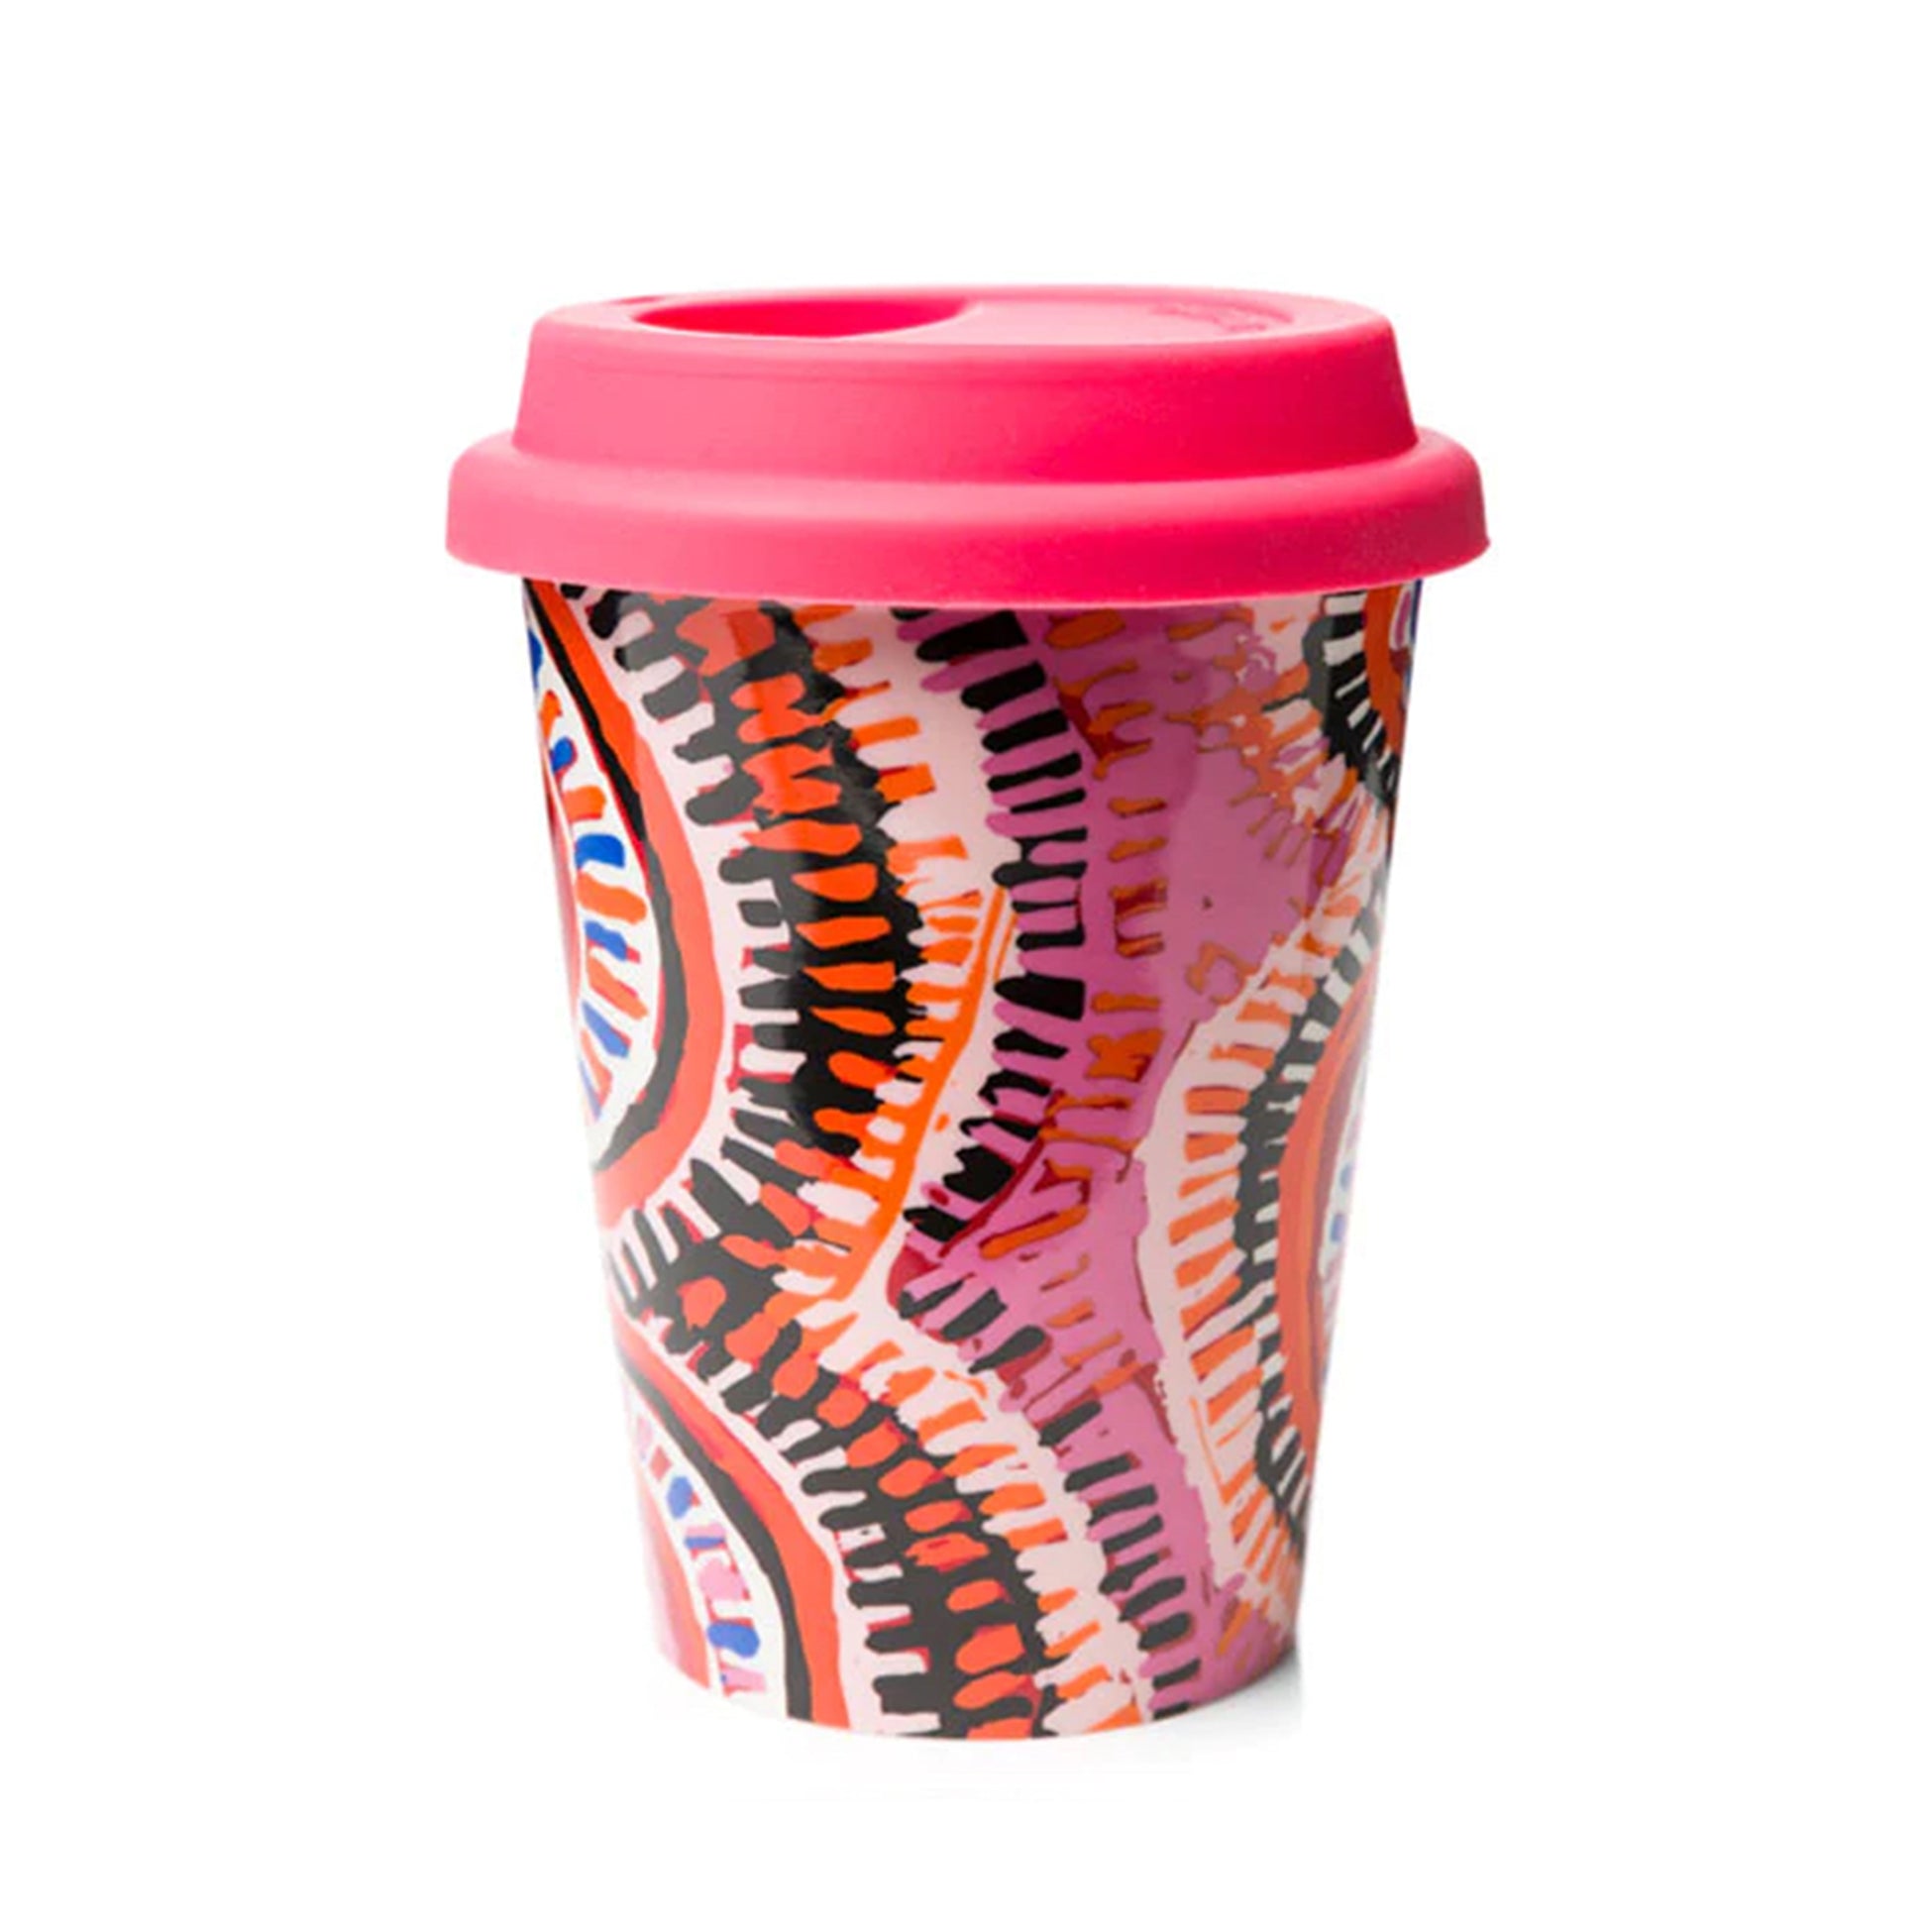 museum gift with reusable keep cup